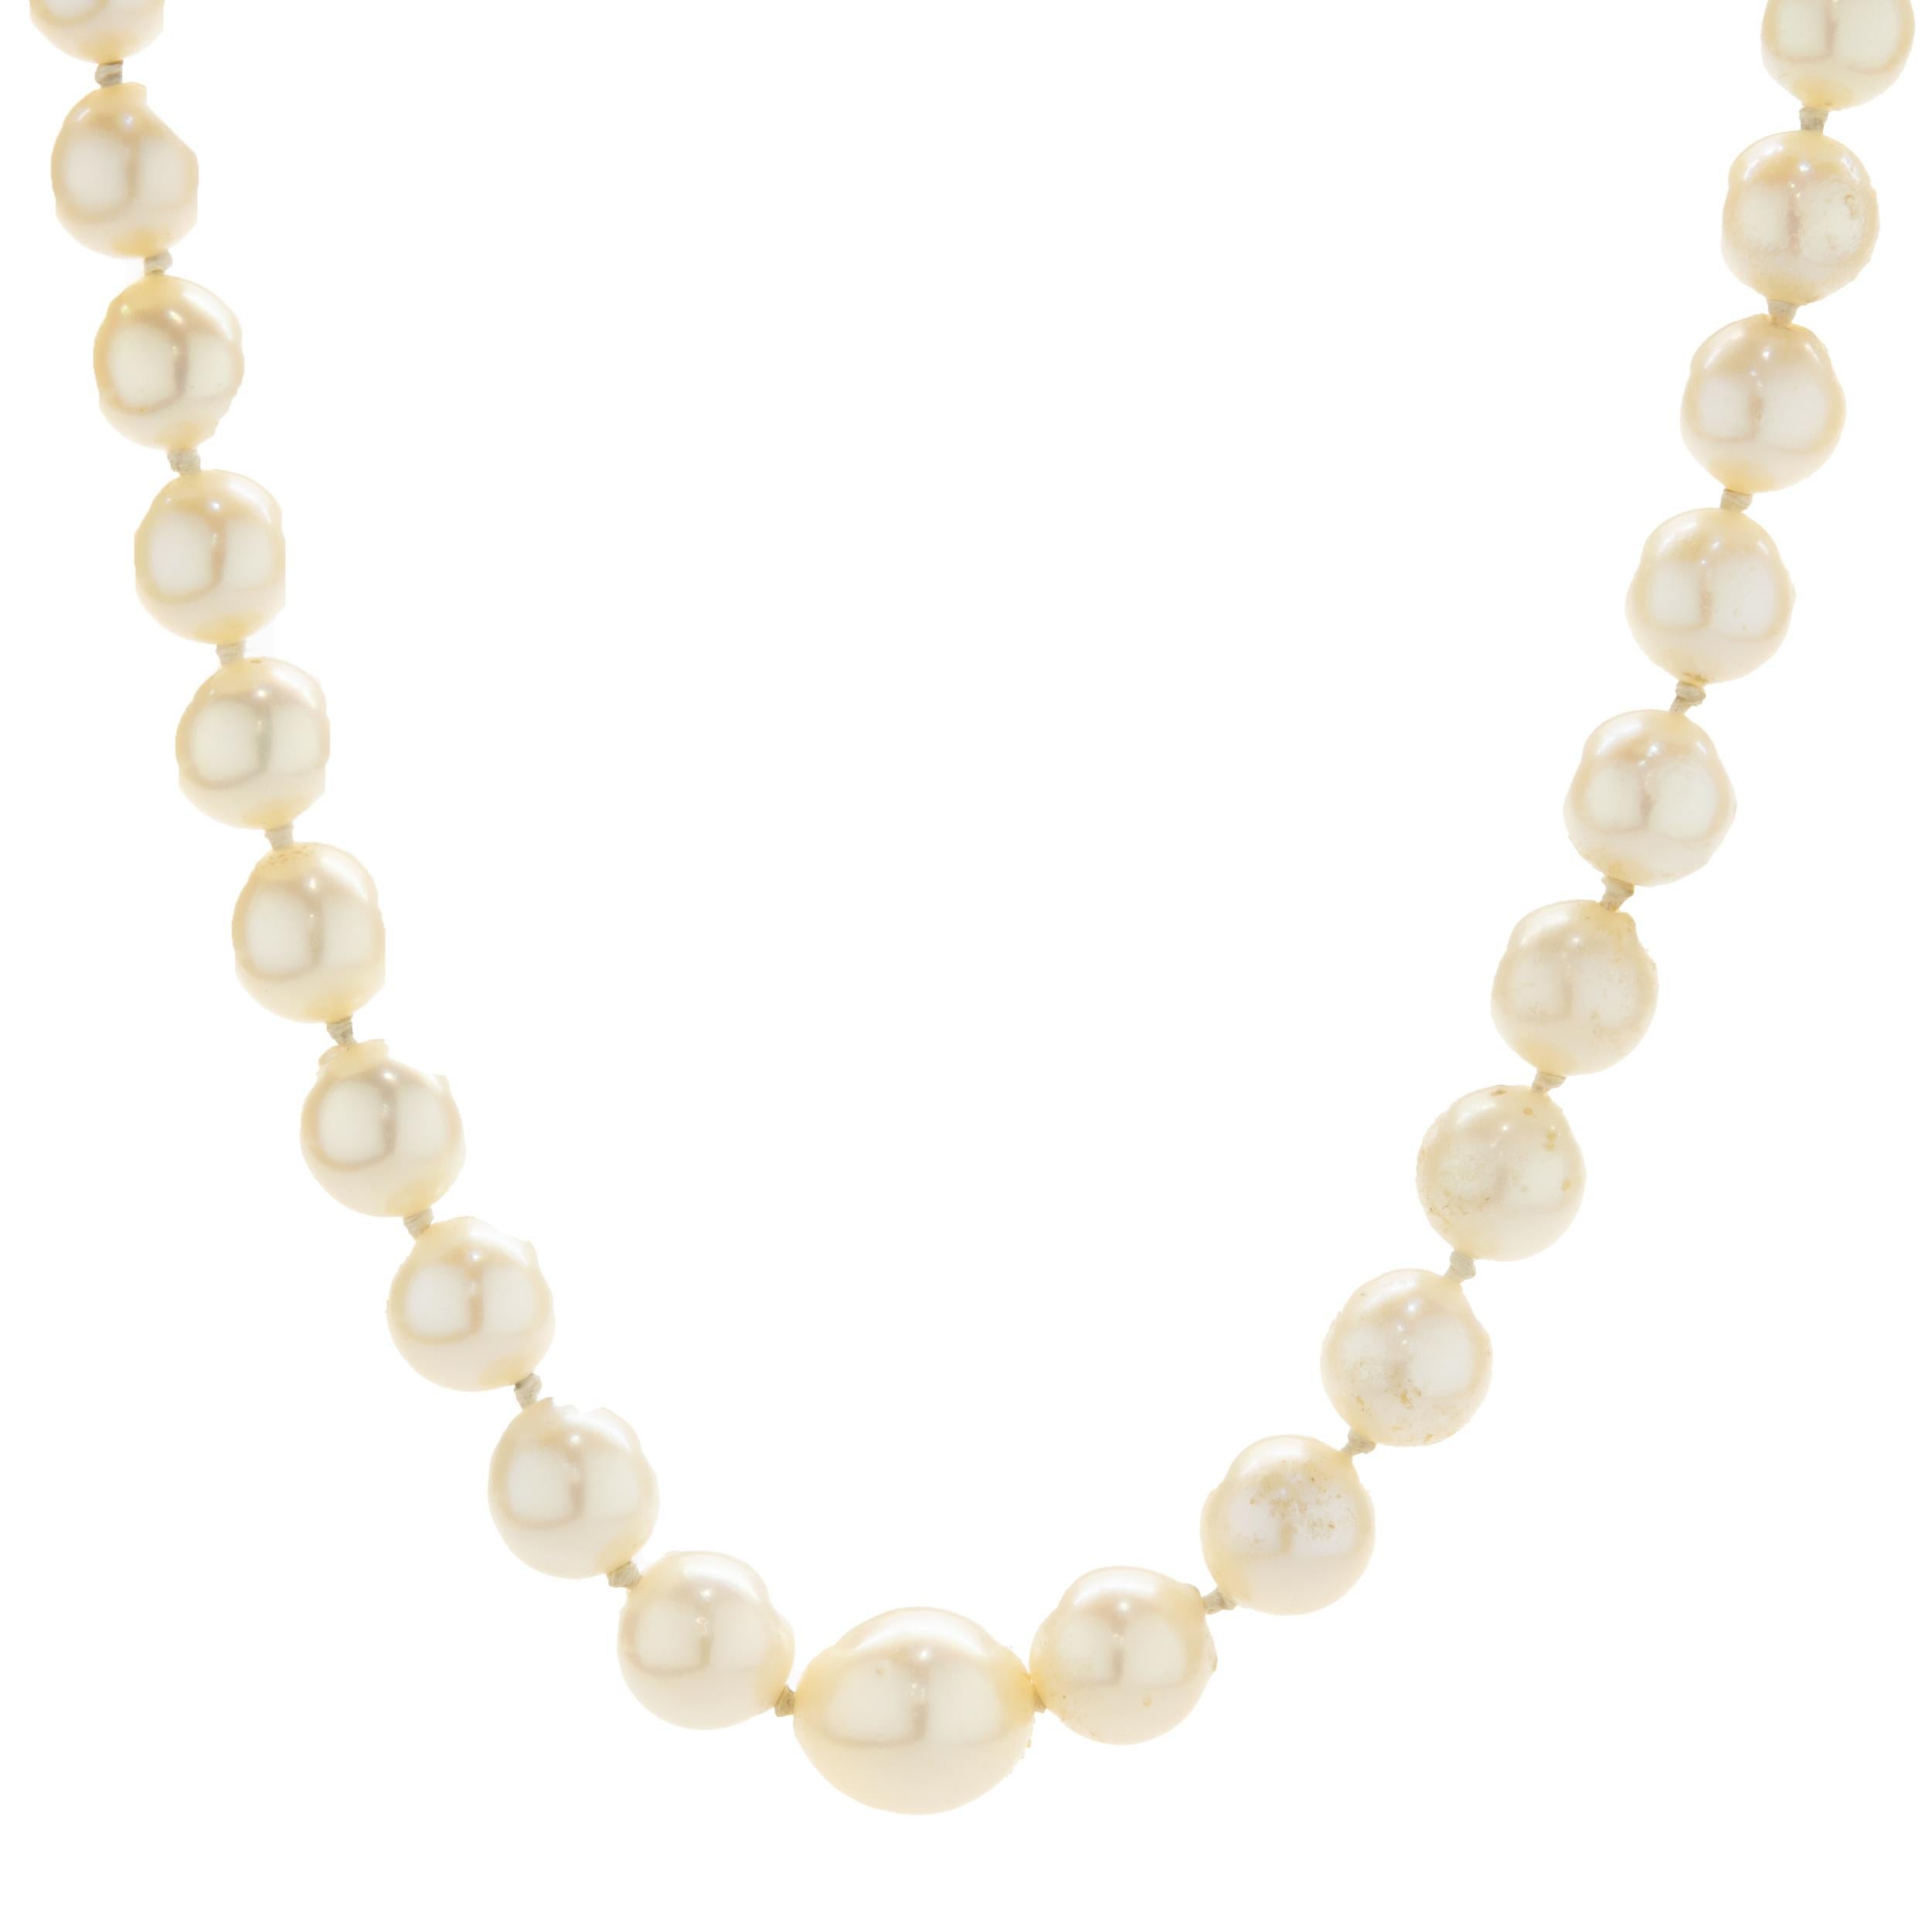 Graduated Pearl Necklace with 14 Karat White Gold Clasp For Sale